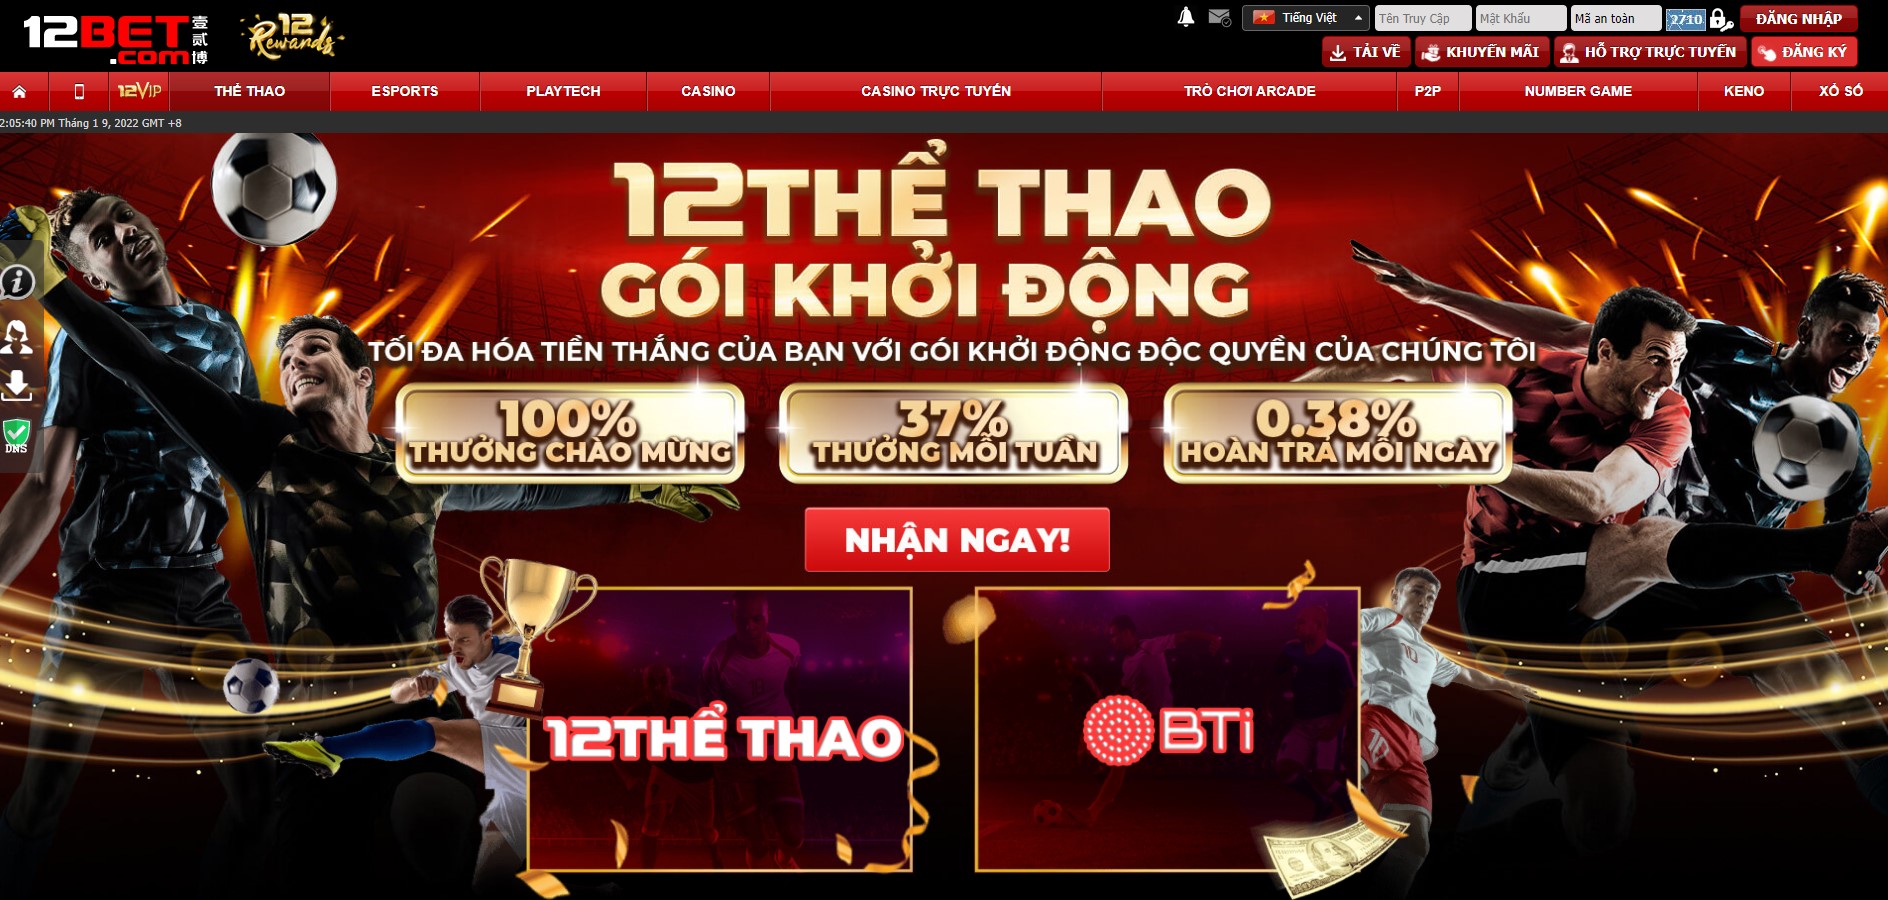 Giao diện 12BET